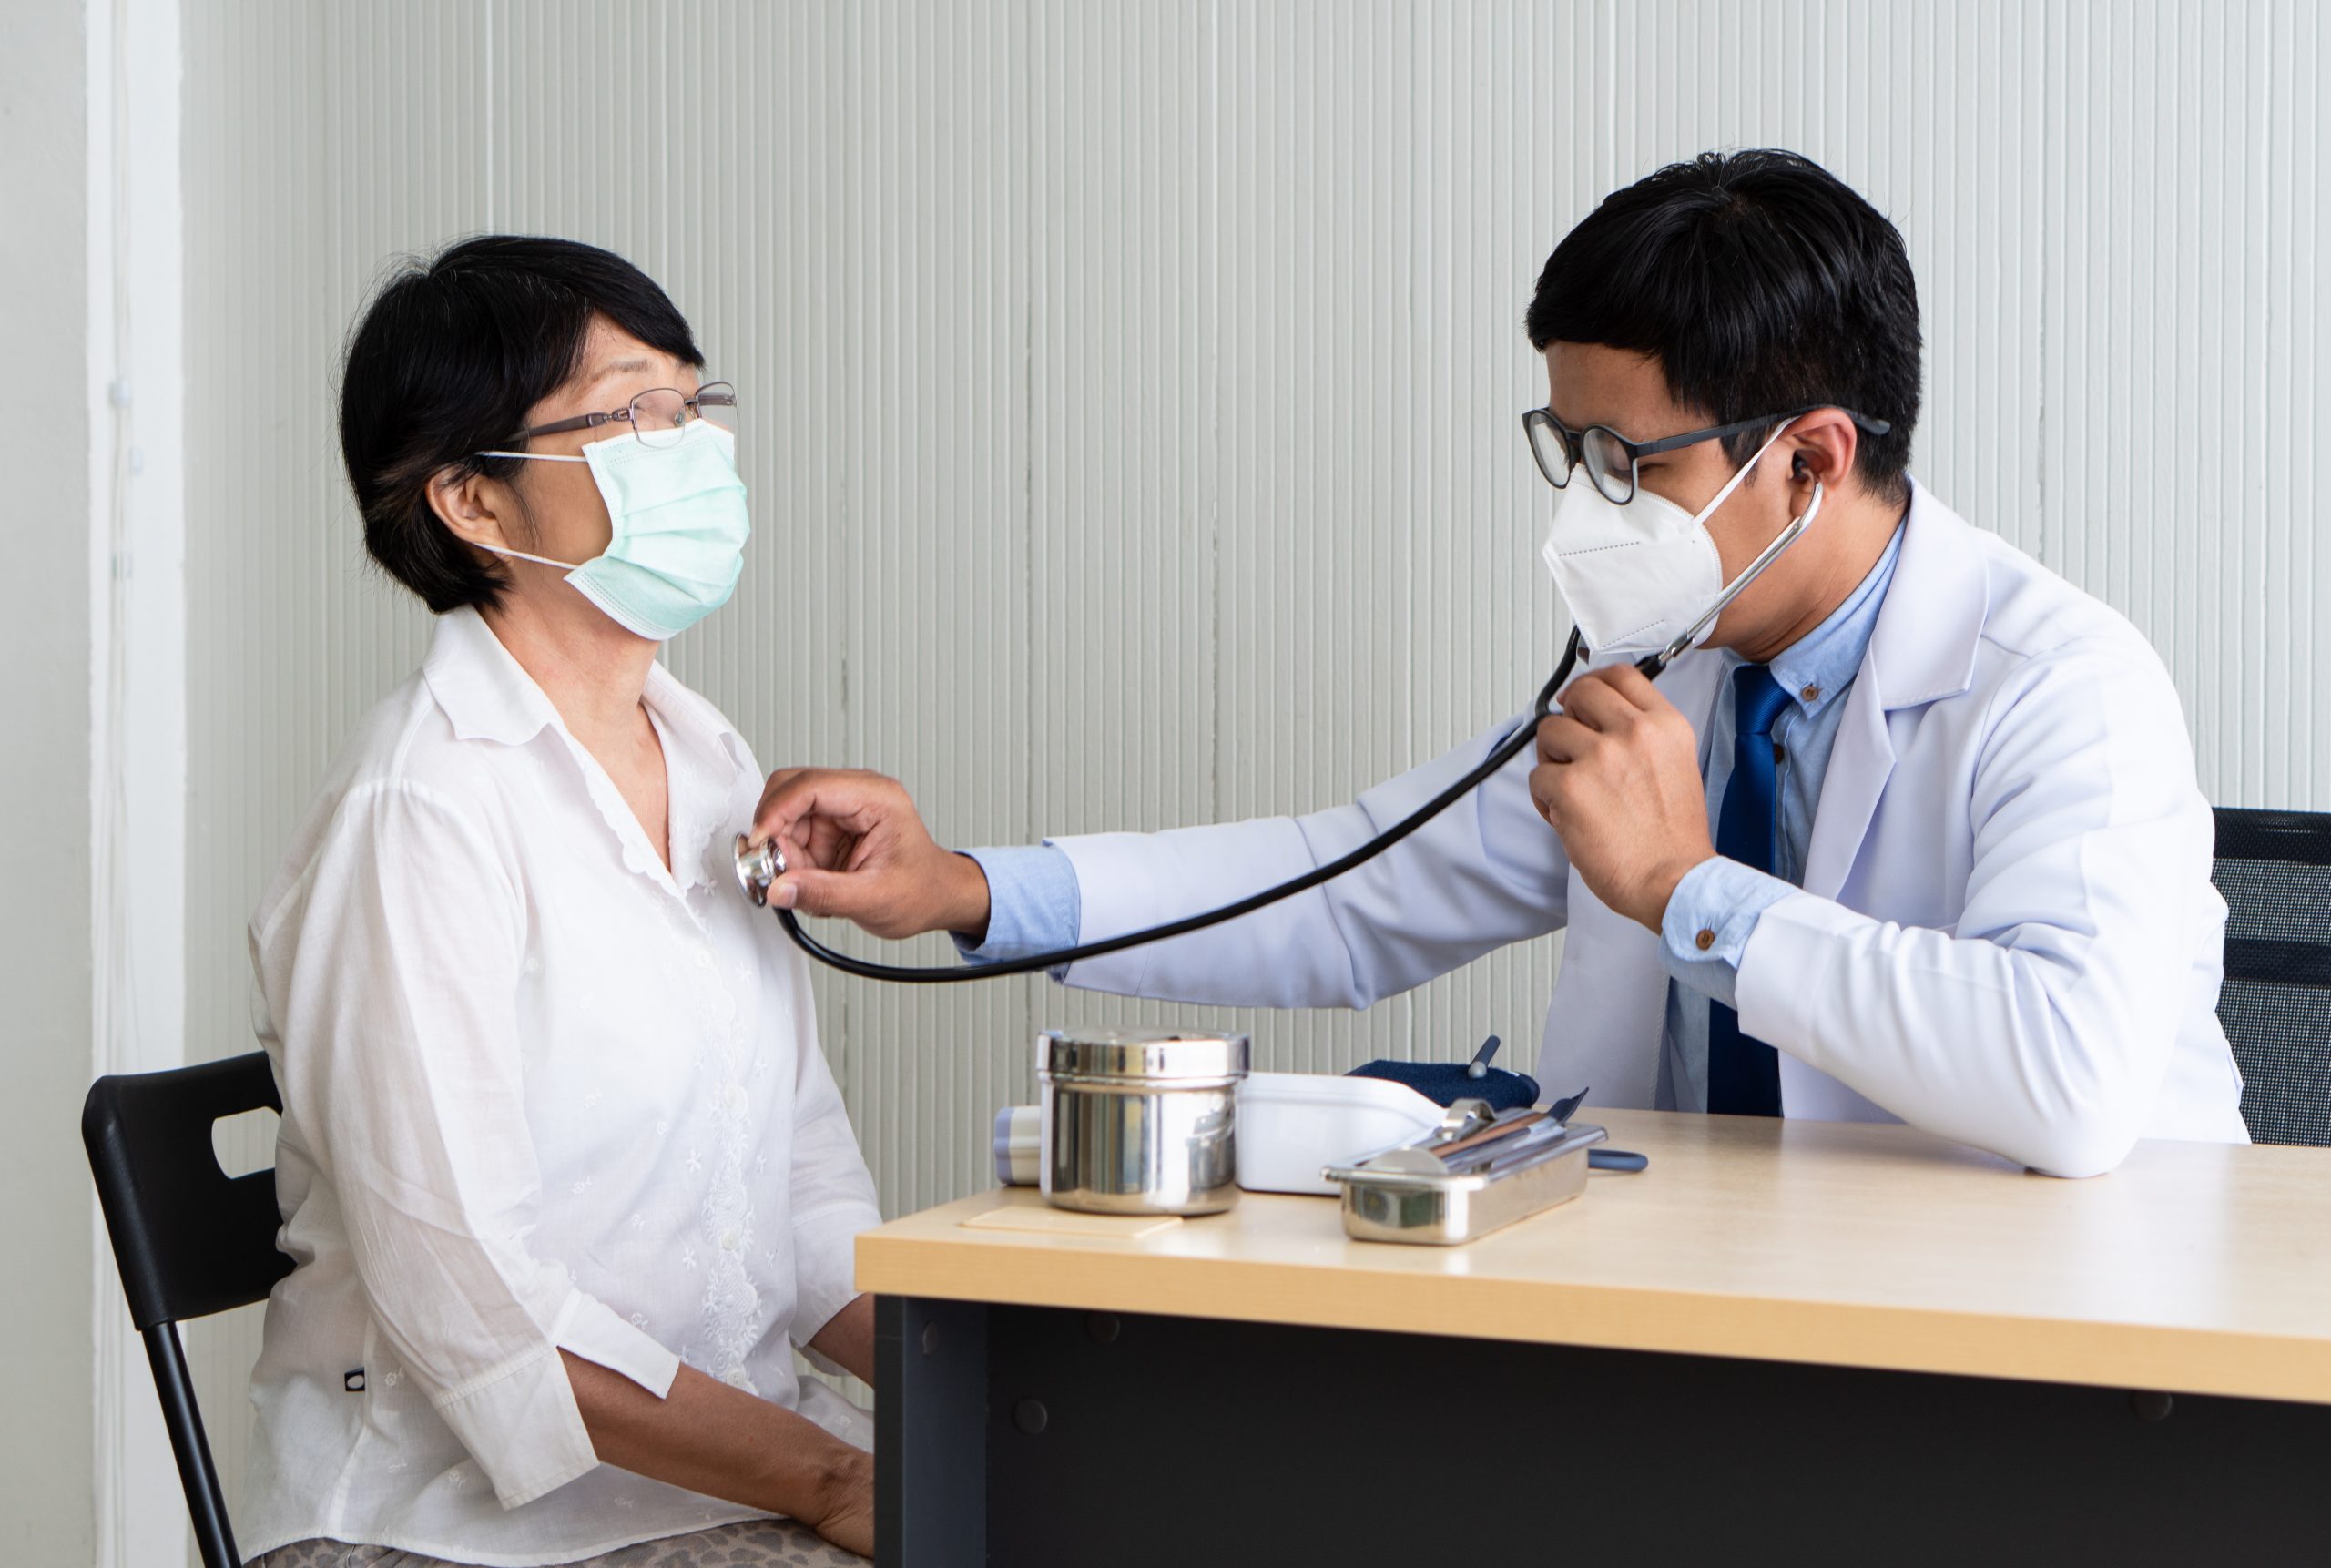 asian doctor using stethoscope to exam the woman patient who come to visit at hospital for sickness. healthcare and medical concept